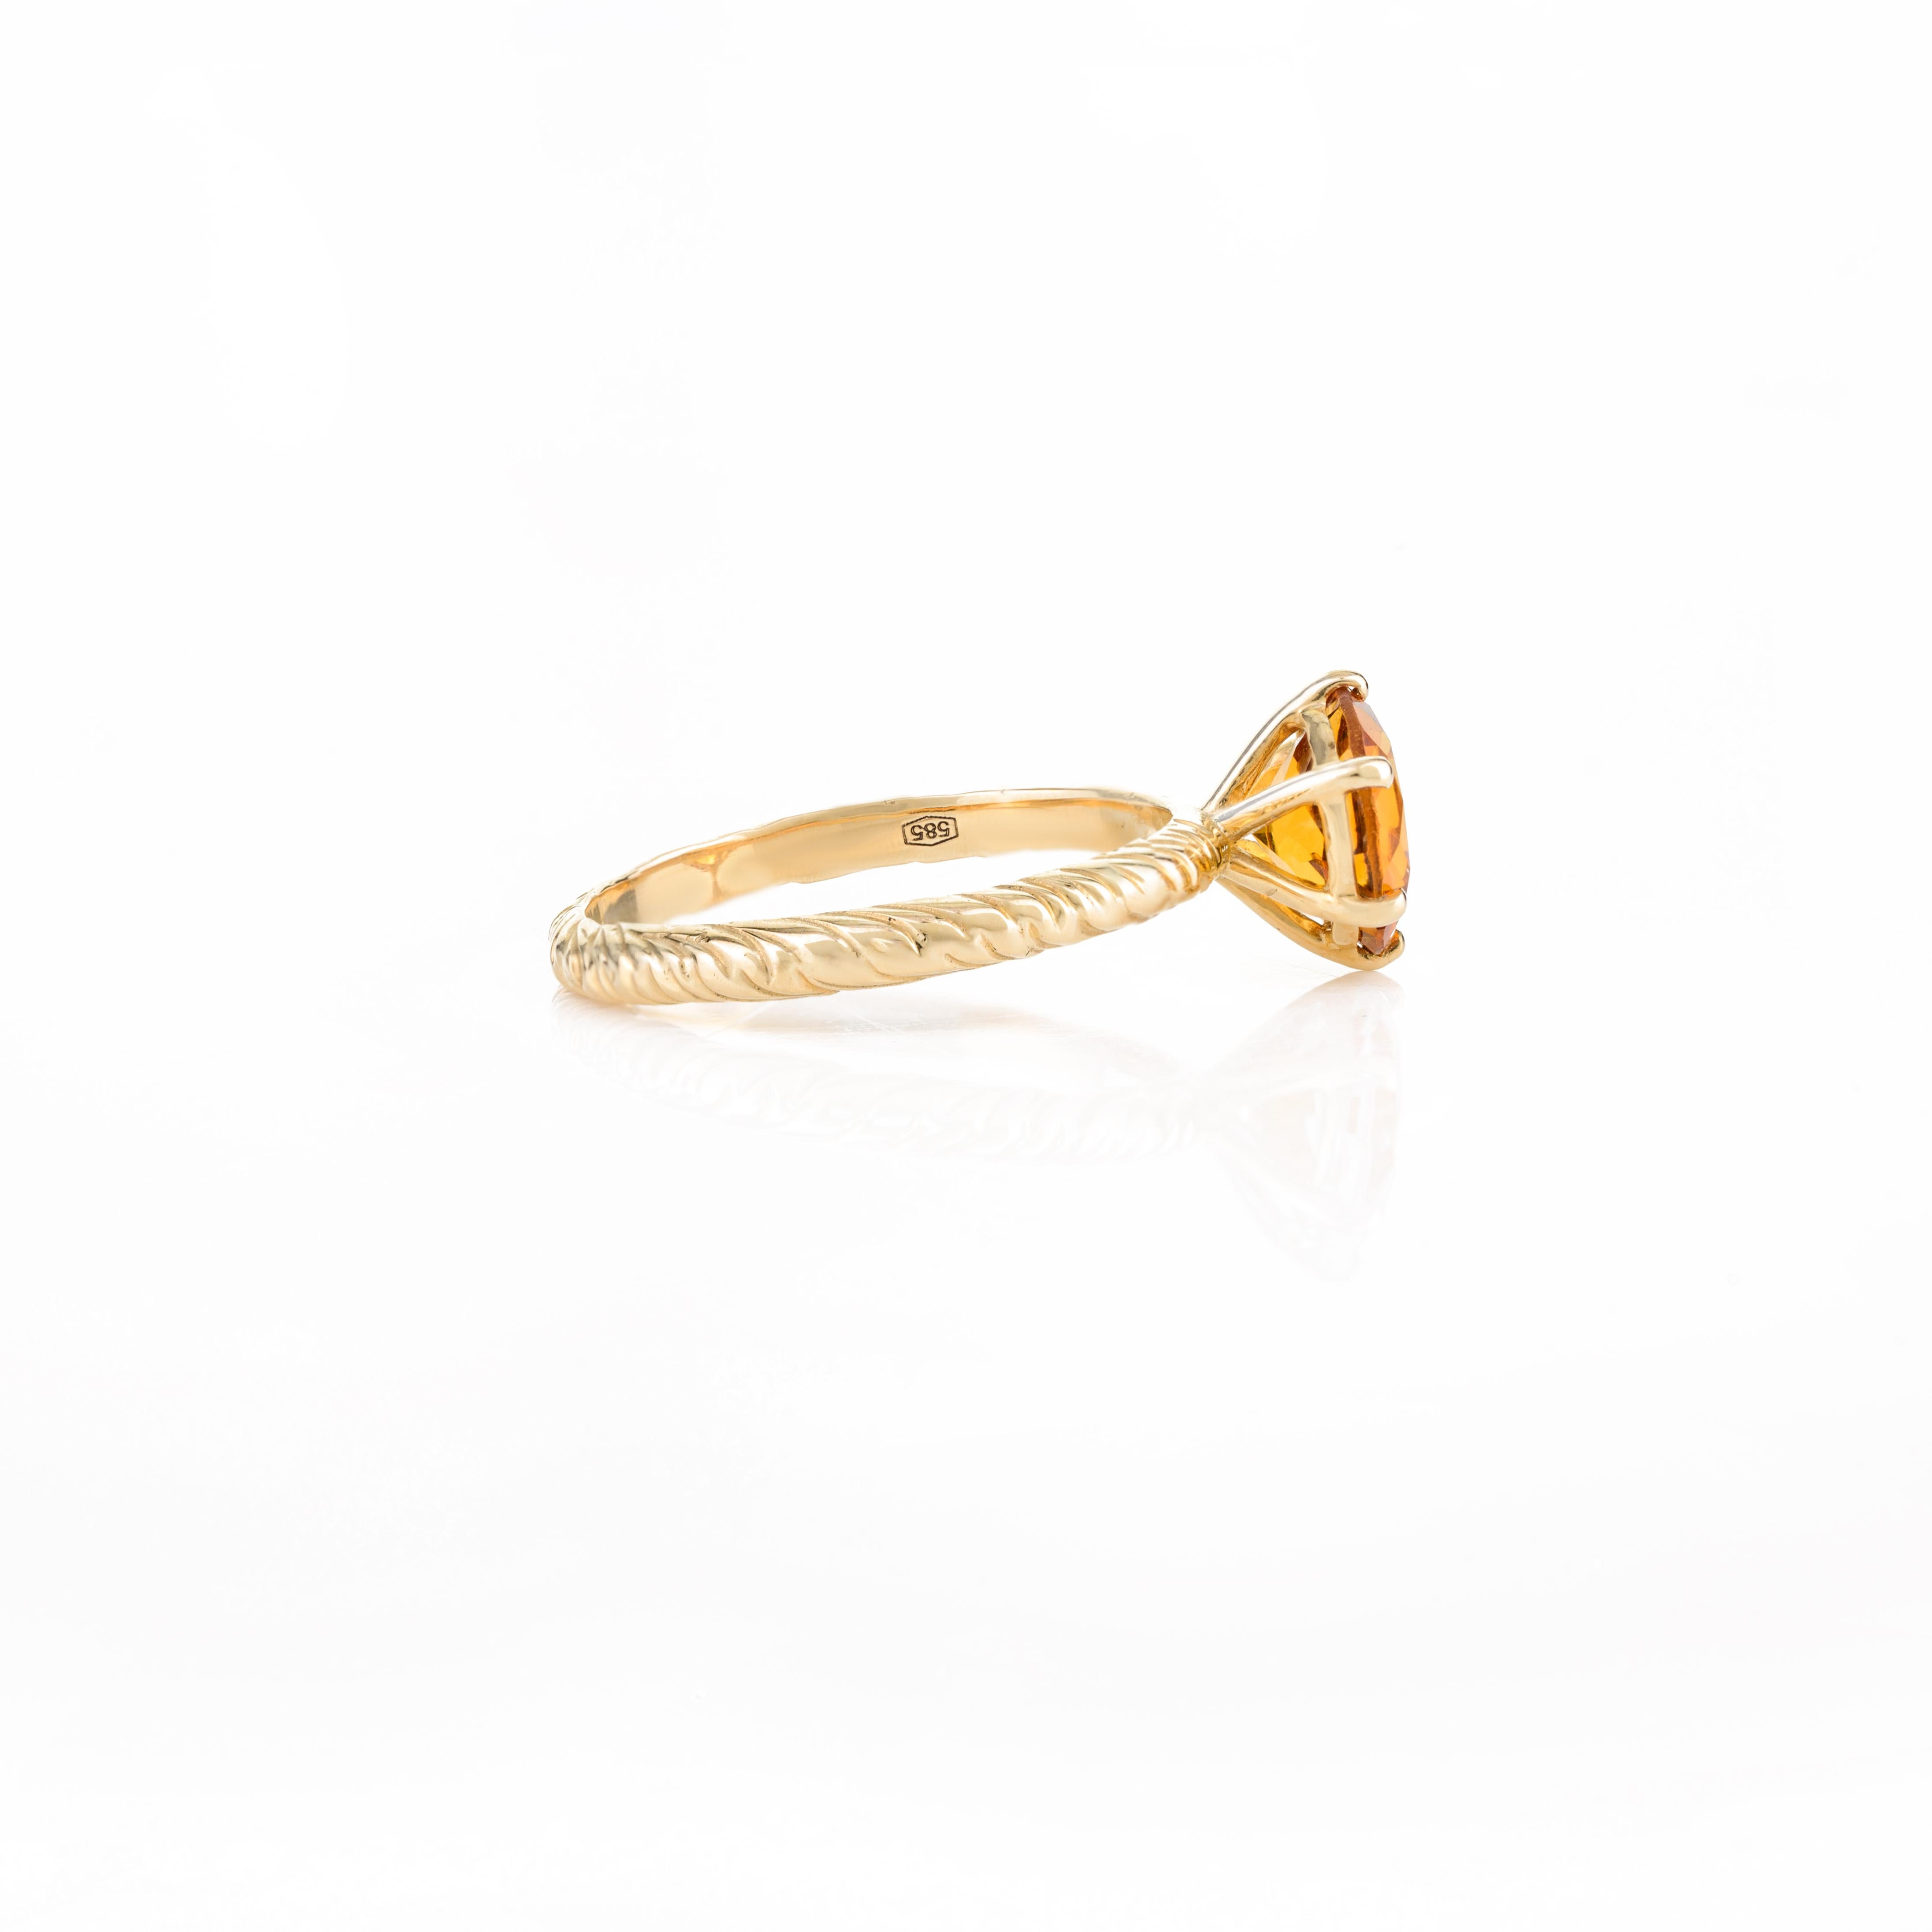 For Sale:  Round Cut Citrine Gemstone Solitaire Ring in 14k Solid Yellow Gold 3